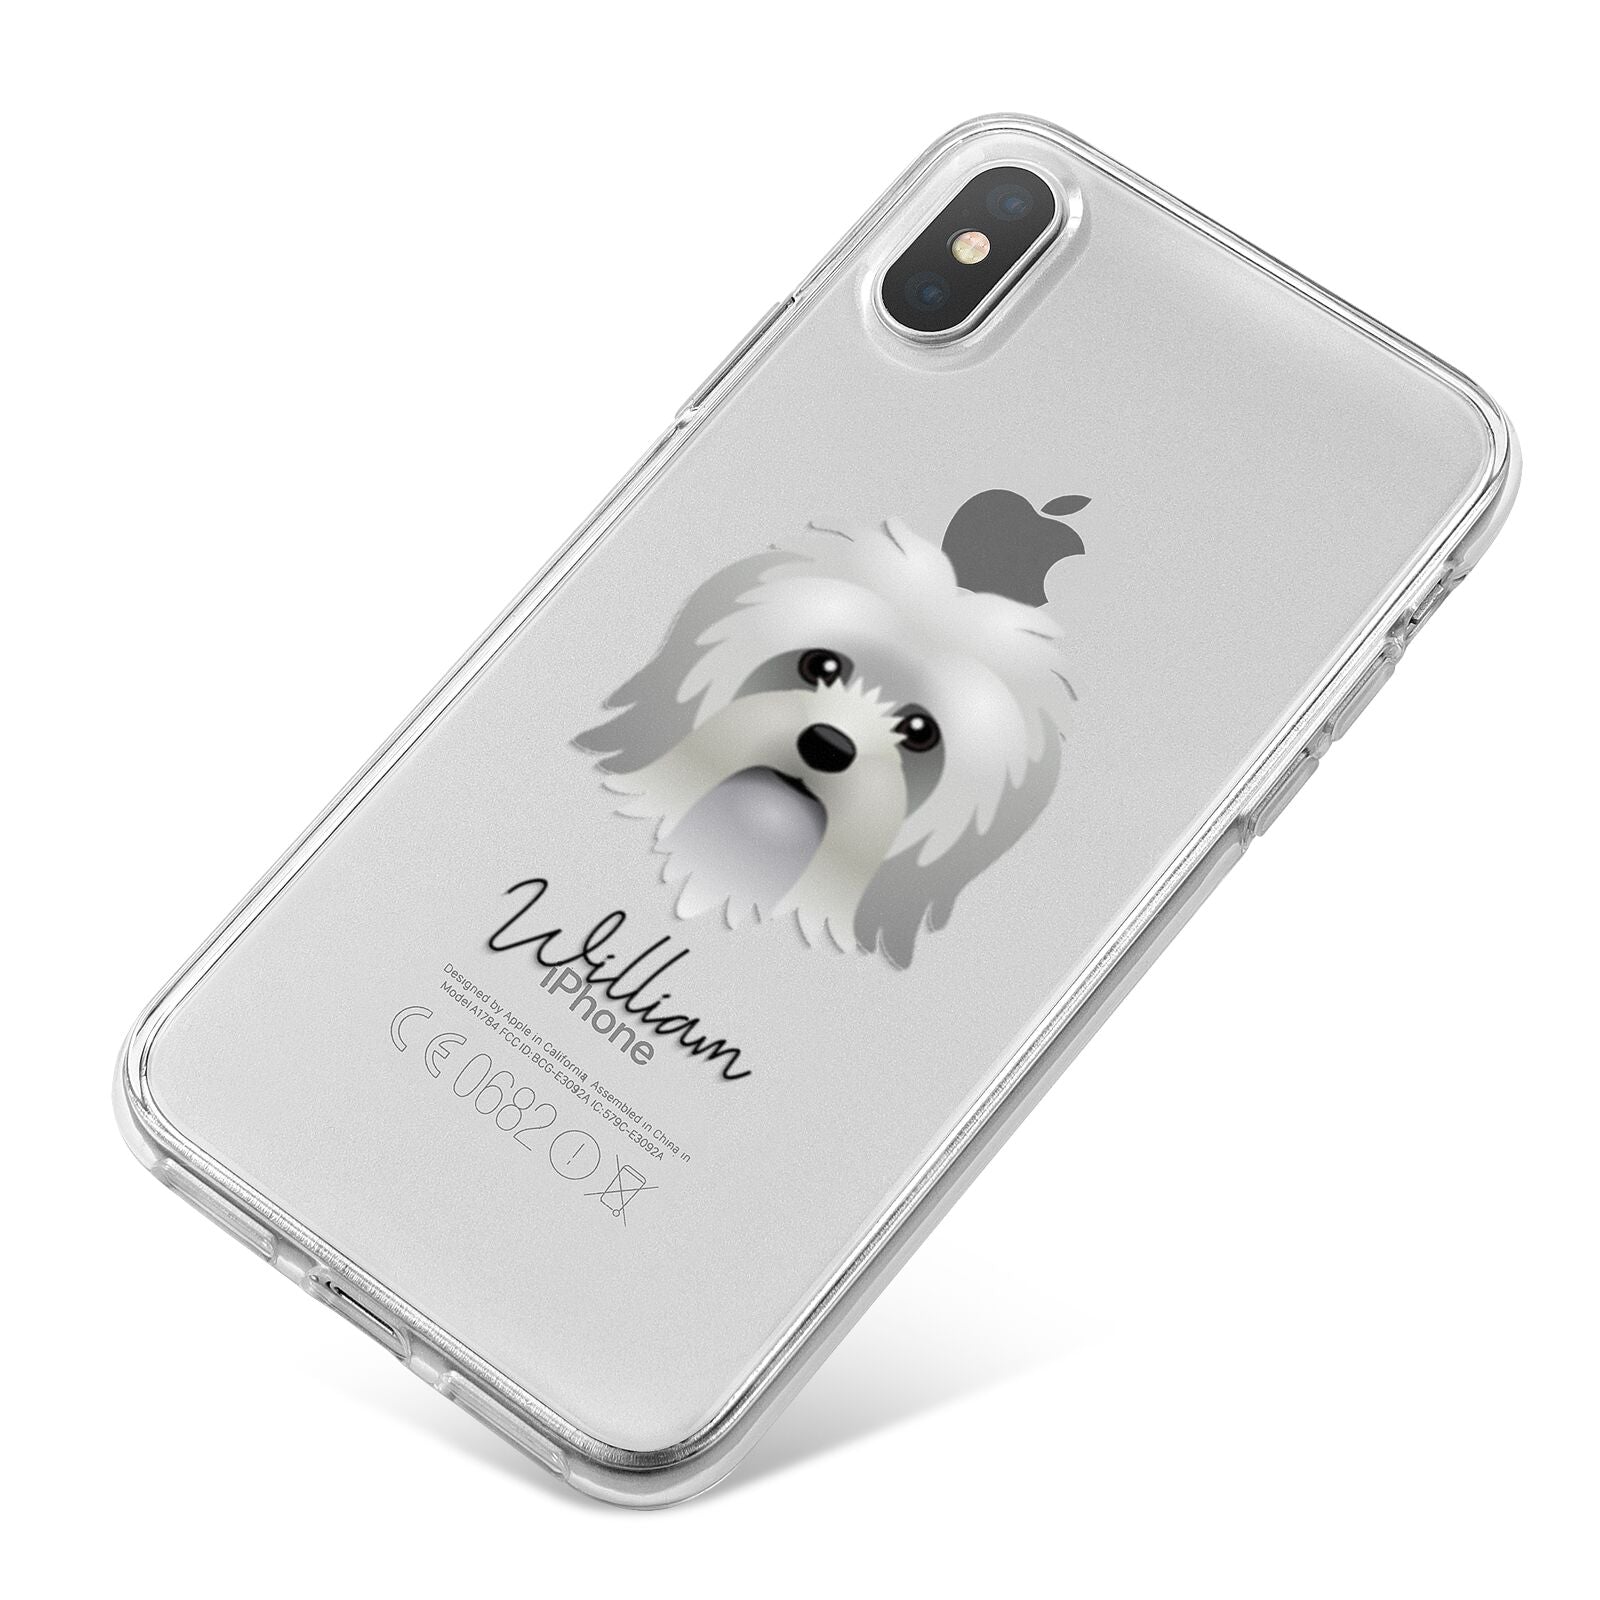 Lo wchen Personalised iPhone X Bumper Case on Silver iPhone